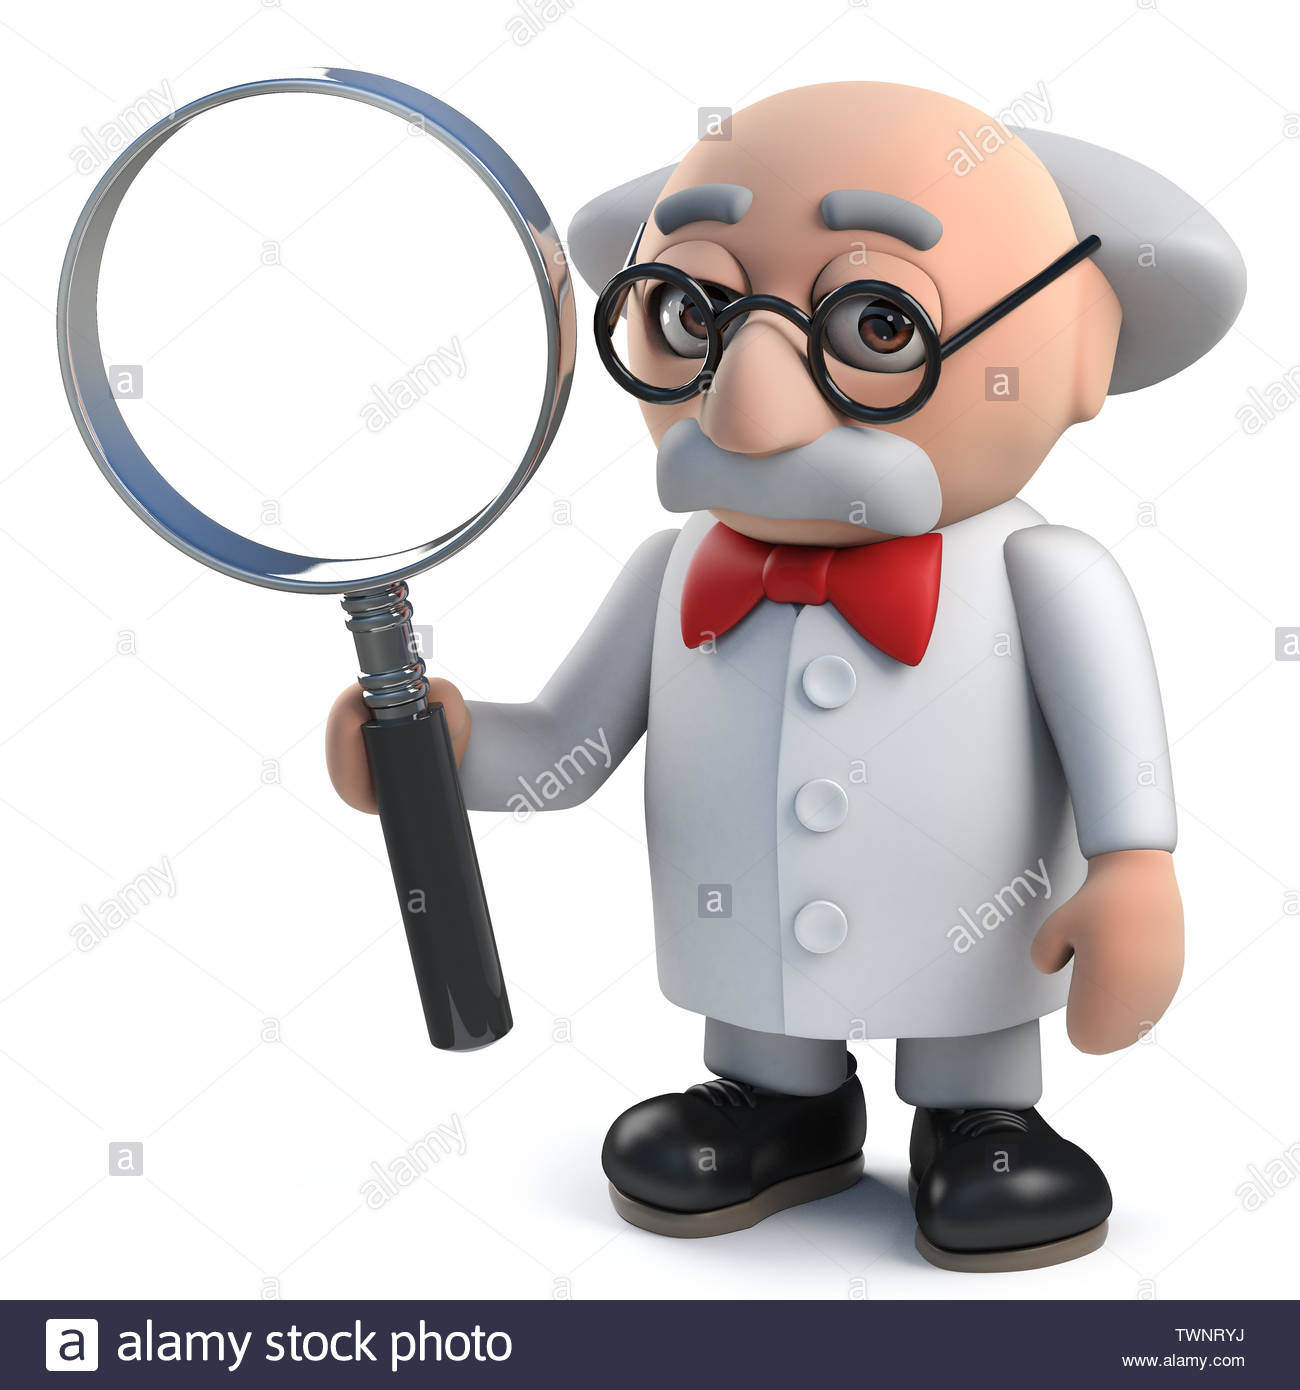 render-of-a-3d-mad-scientist-character-holding-a-magnifying-glass-TWNRYJ.jpg